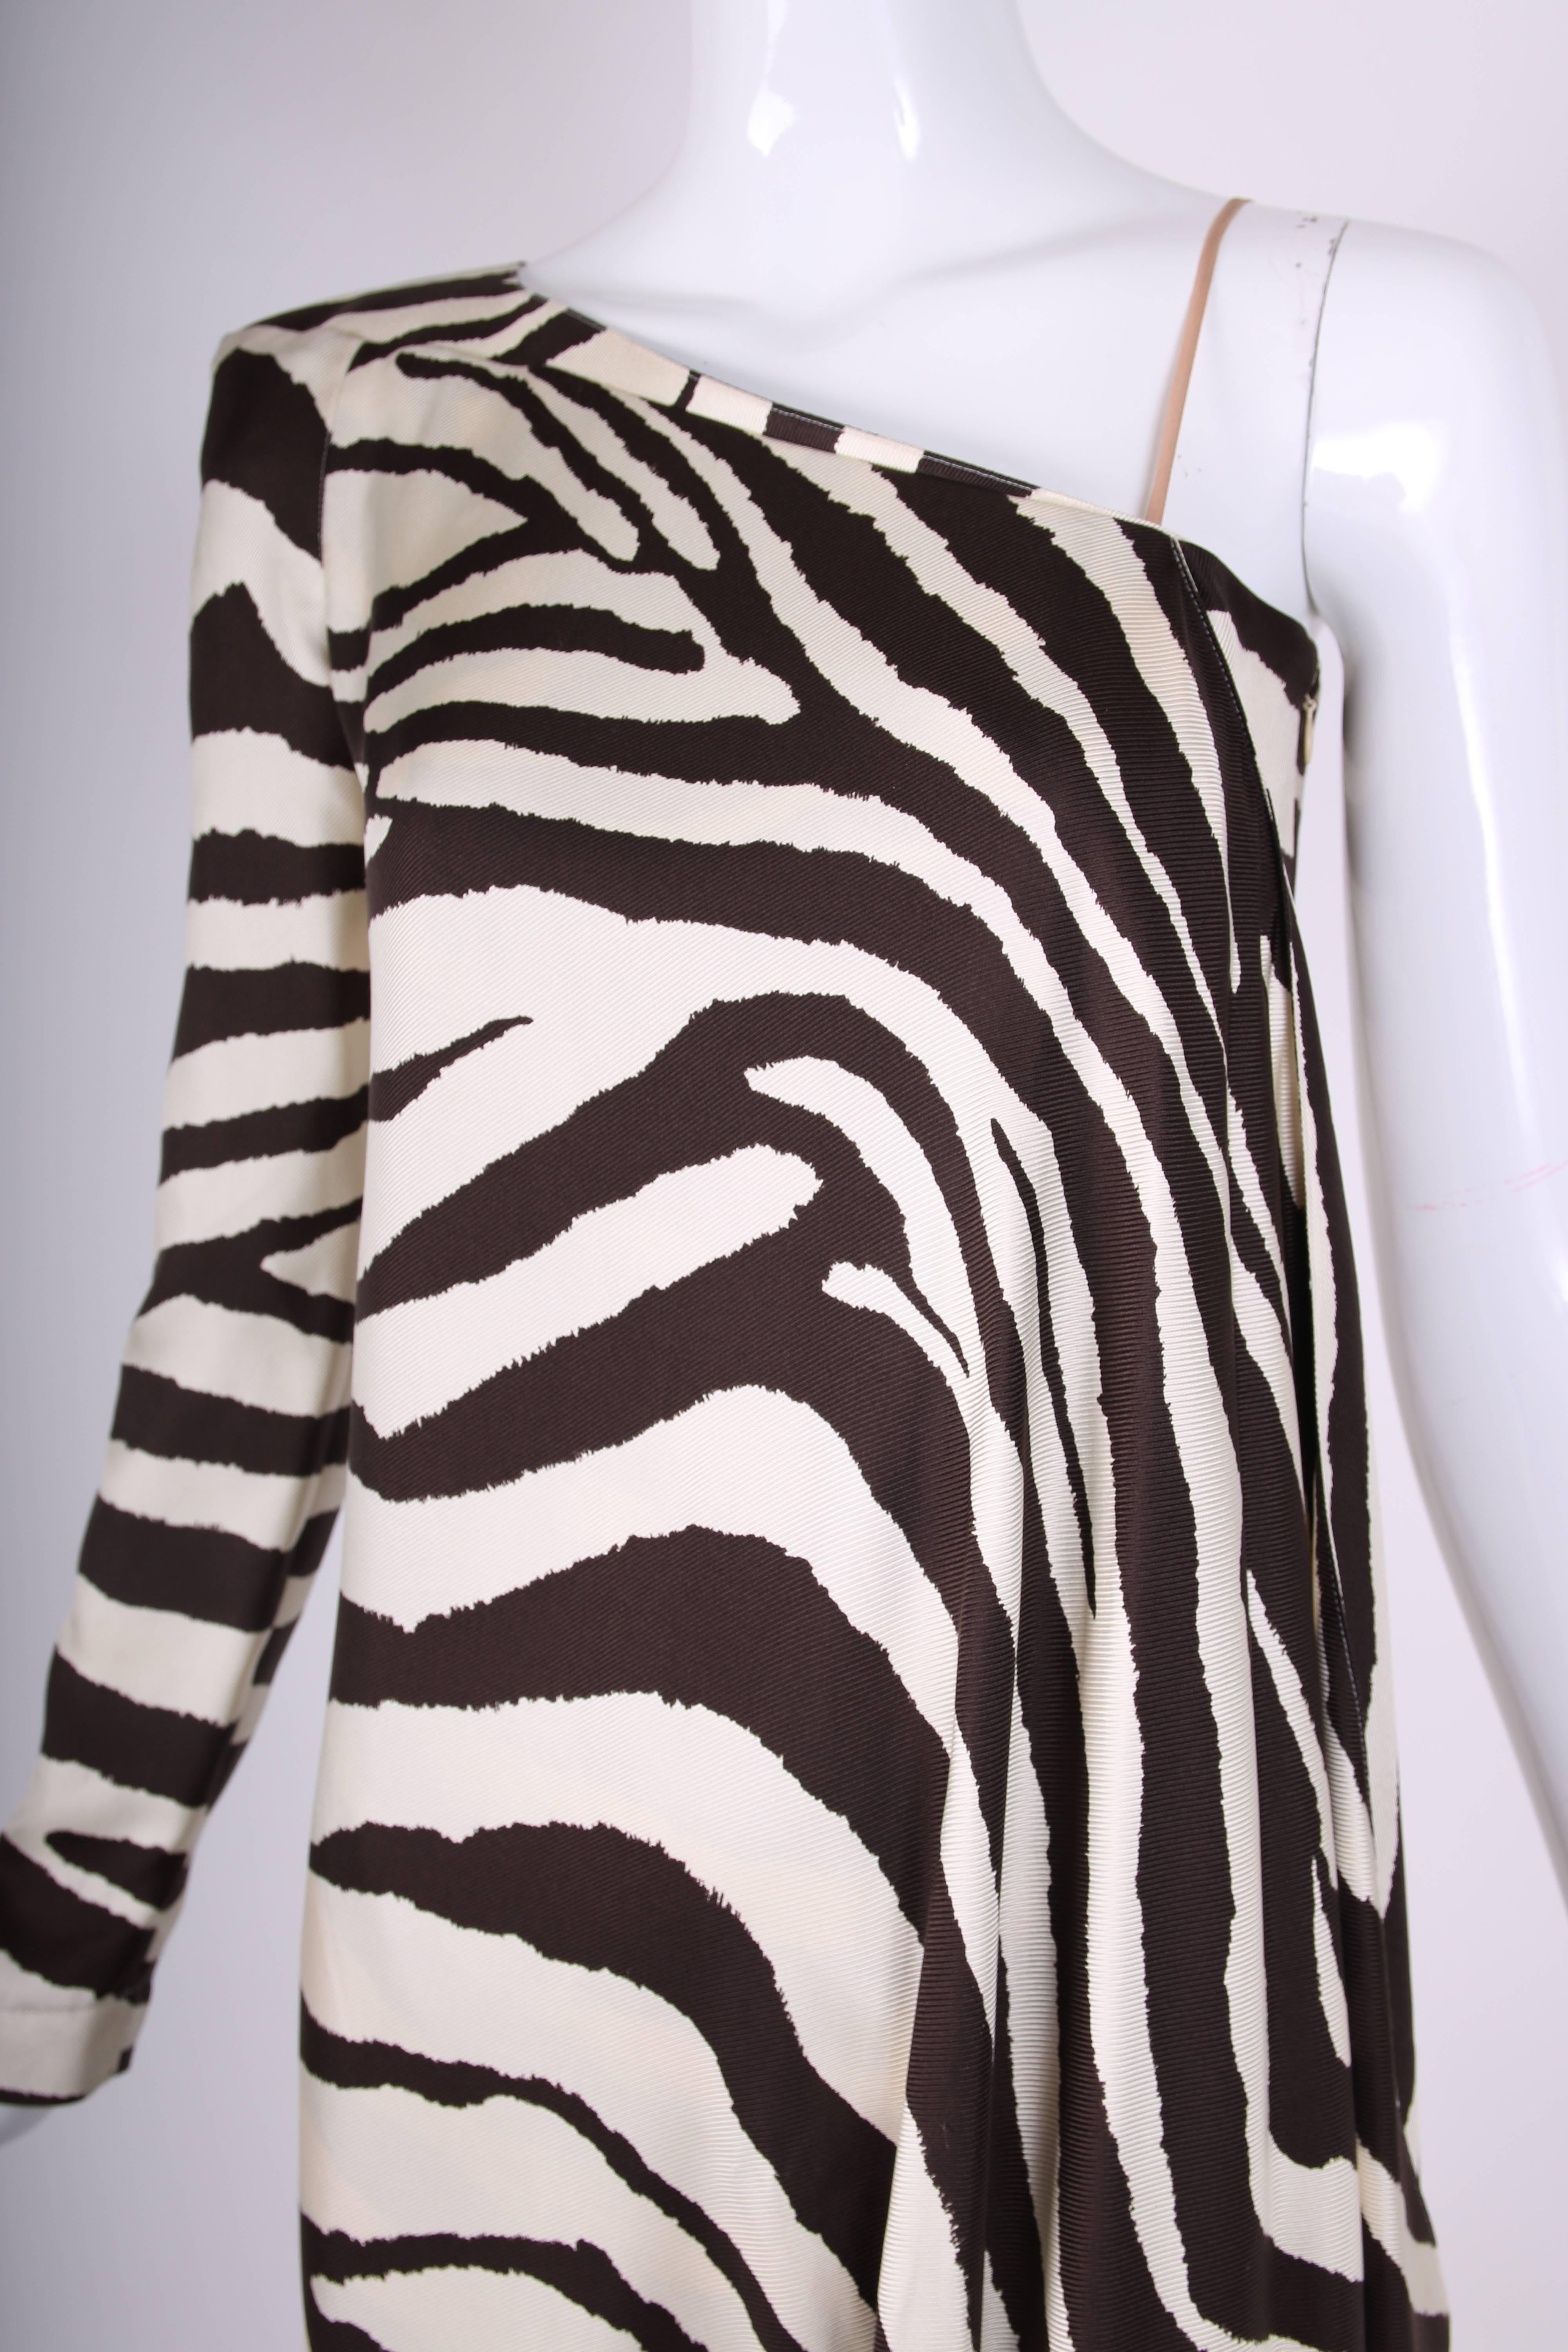 1998 S/S Thierry Mugler Silk Single Shoulder Cocktail Dress w/Zebra Print In Excellent Condition For Sale In Studio City, CA